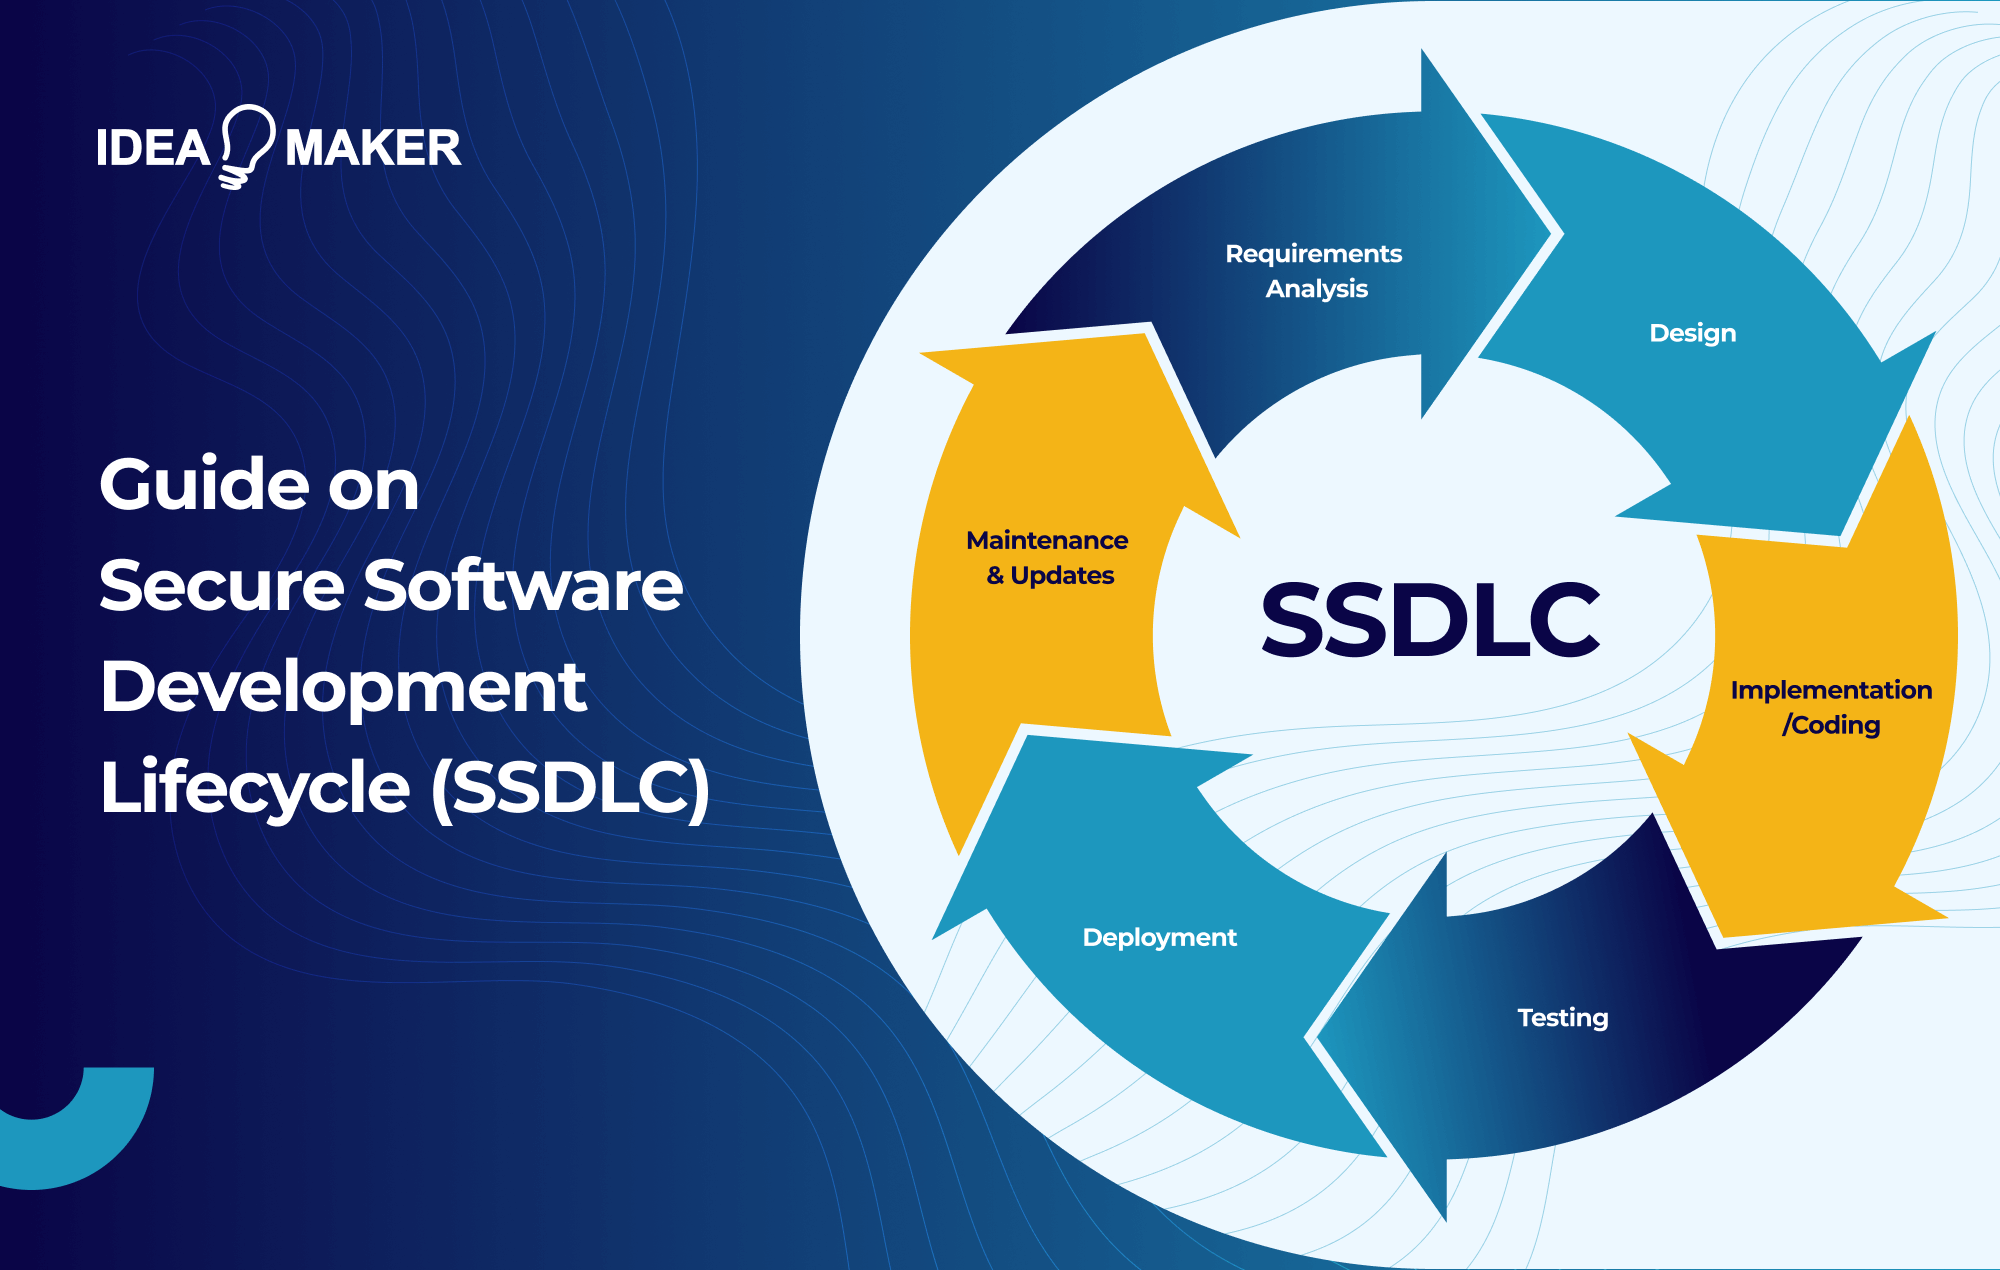 Guide on Secure Software Development Lifecycle (SSDLC)